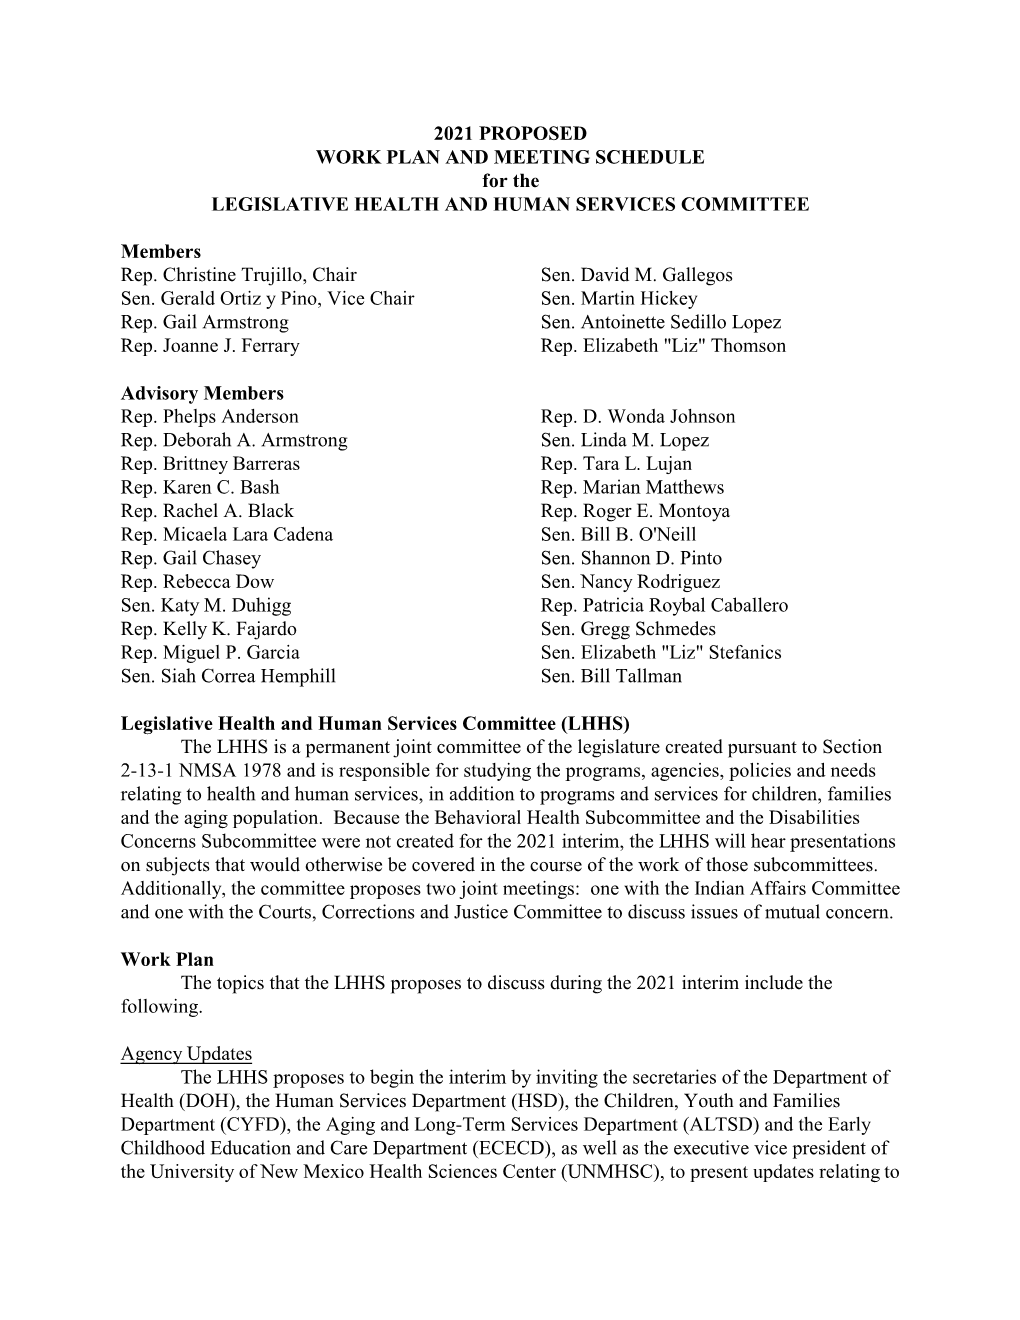 2021 PROPOSED WORK PLAN and MEETING SCHEDULE for the LEGISLATIVE HEALTH and HUMAN SERVICES COMMITTEE Members Rep. Christine Truj